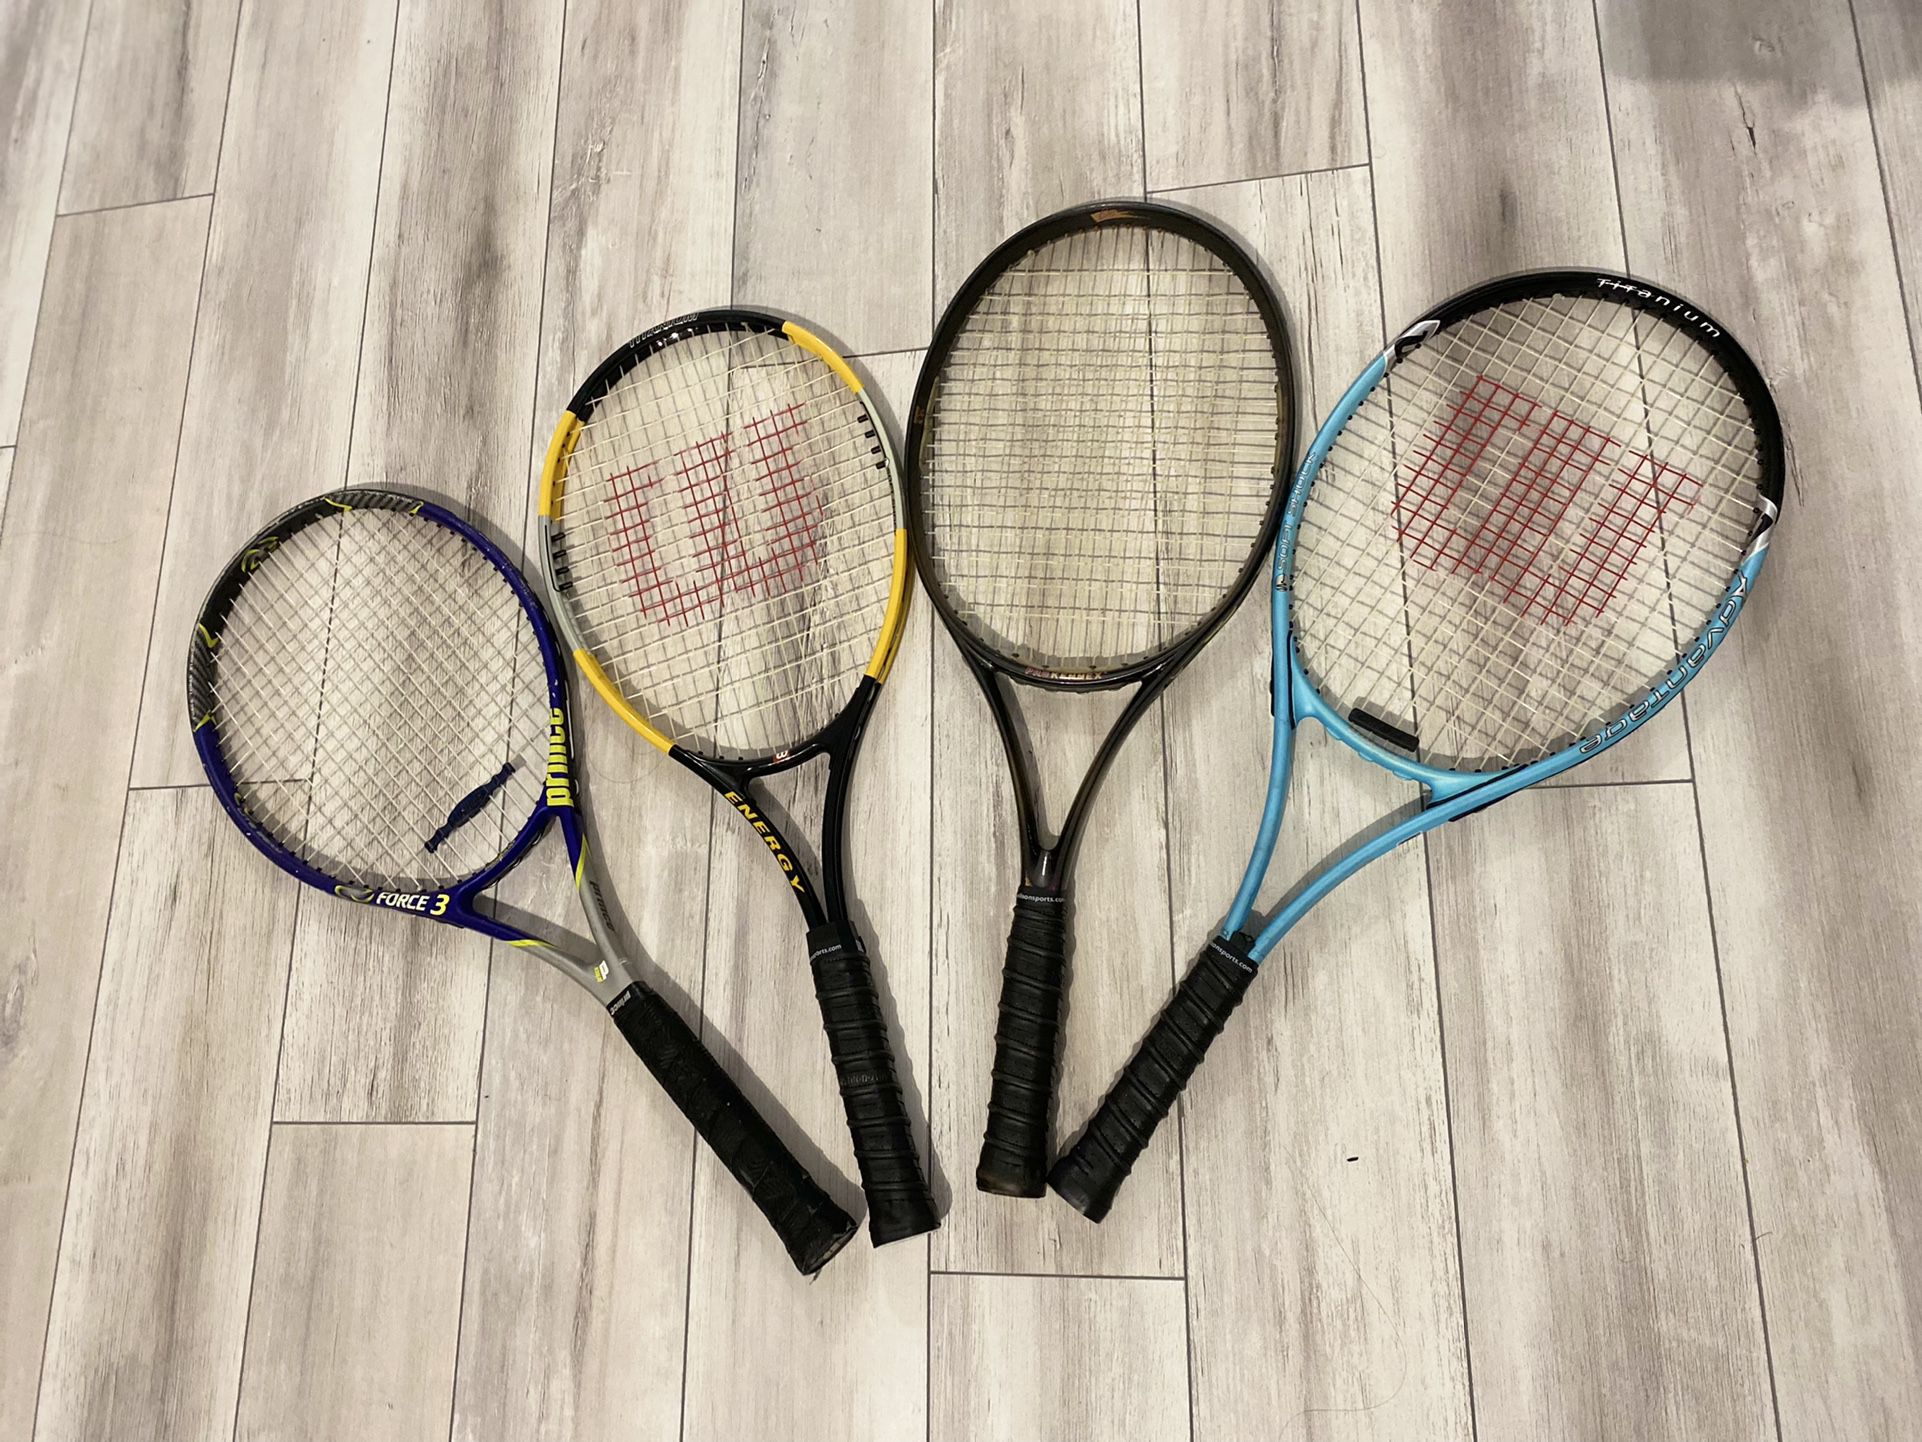 Lot Of 4 Tennis Rackets, Perfect For A Family Or Doubles